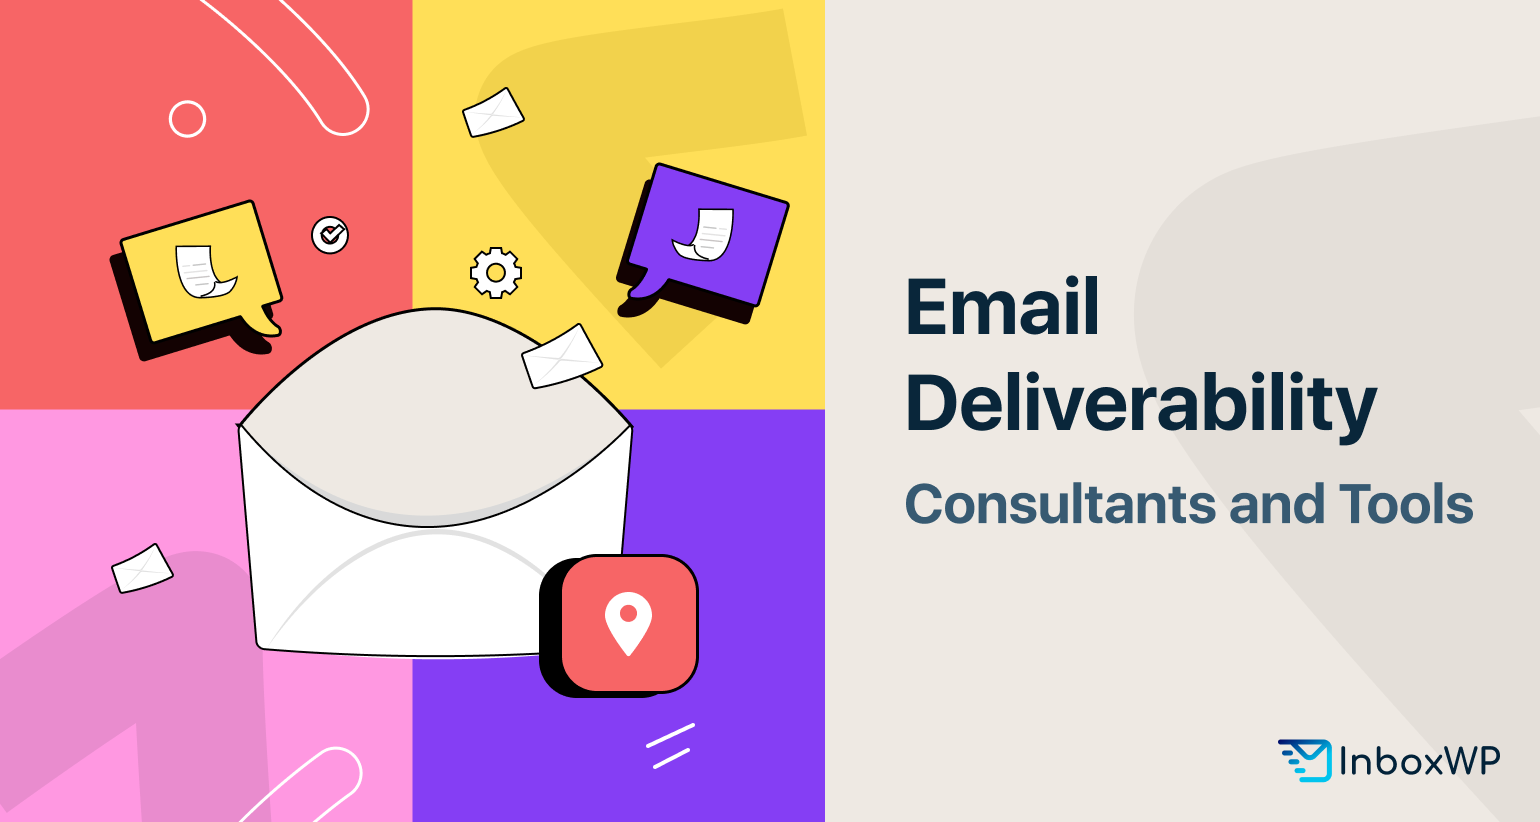 Email Deliverability Consultants